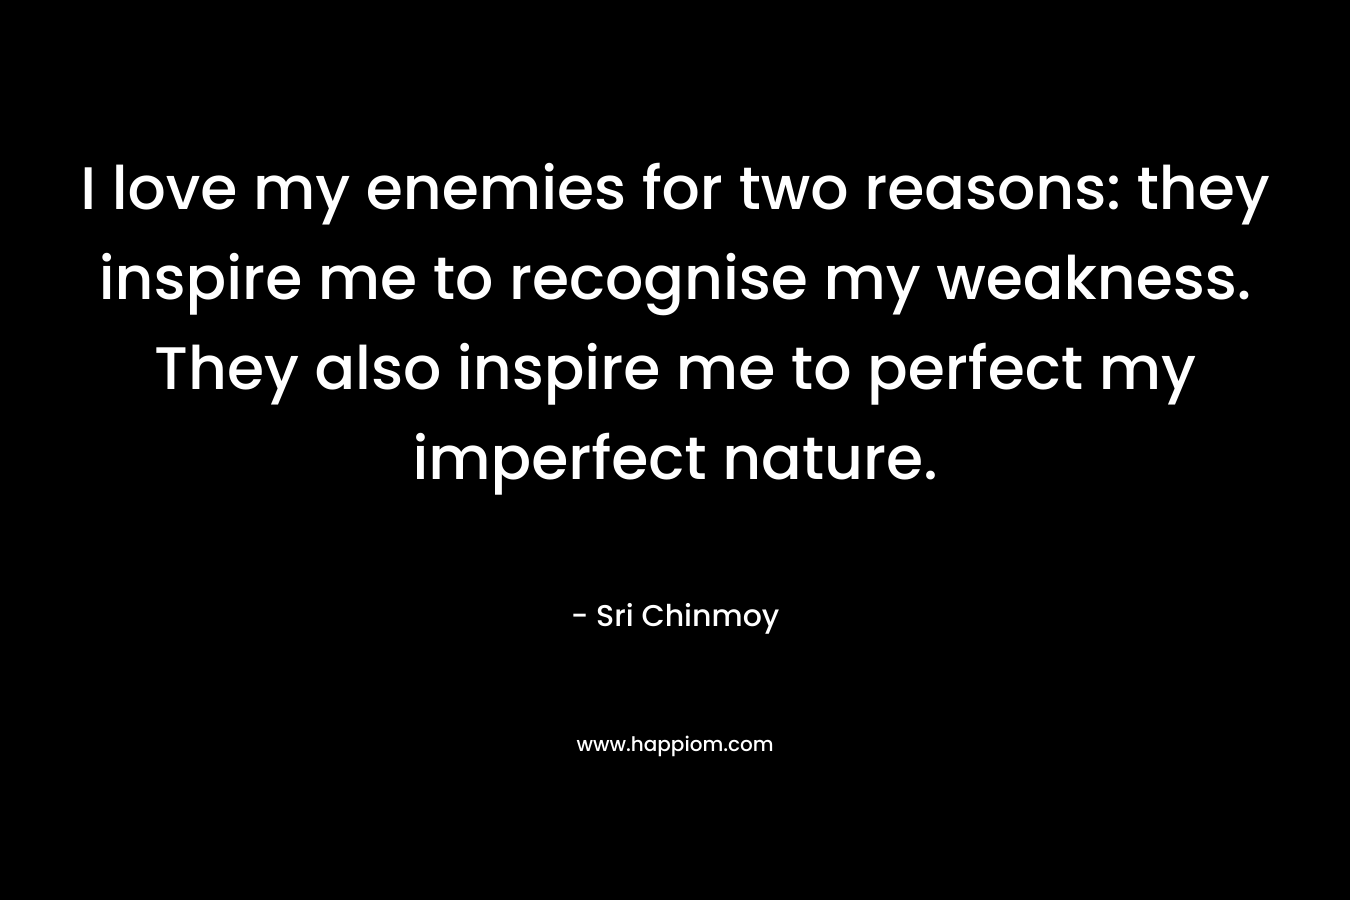 I love my enemies for two reasons: they inspire me to recognise my weakness. They also inspire me to perfect my imperfect nature. – Sri Chinmoy